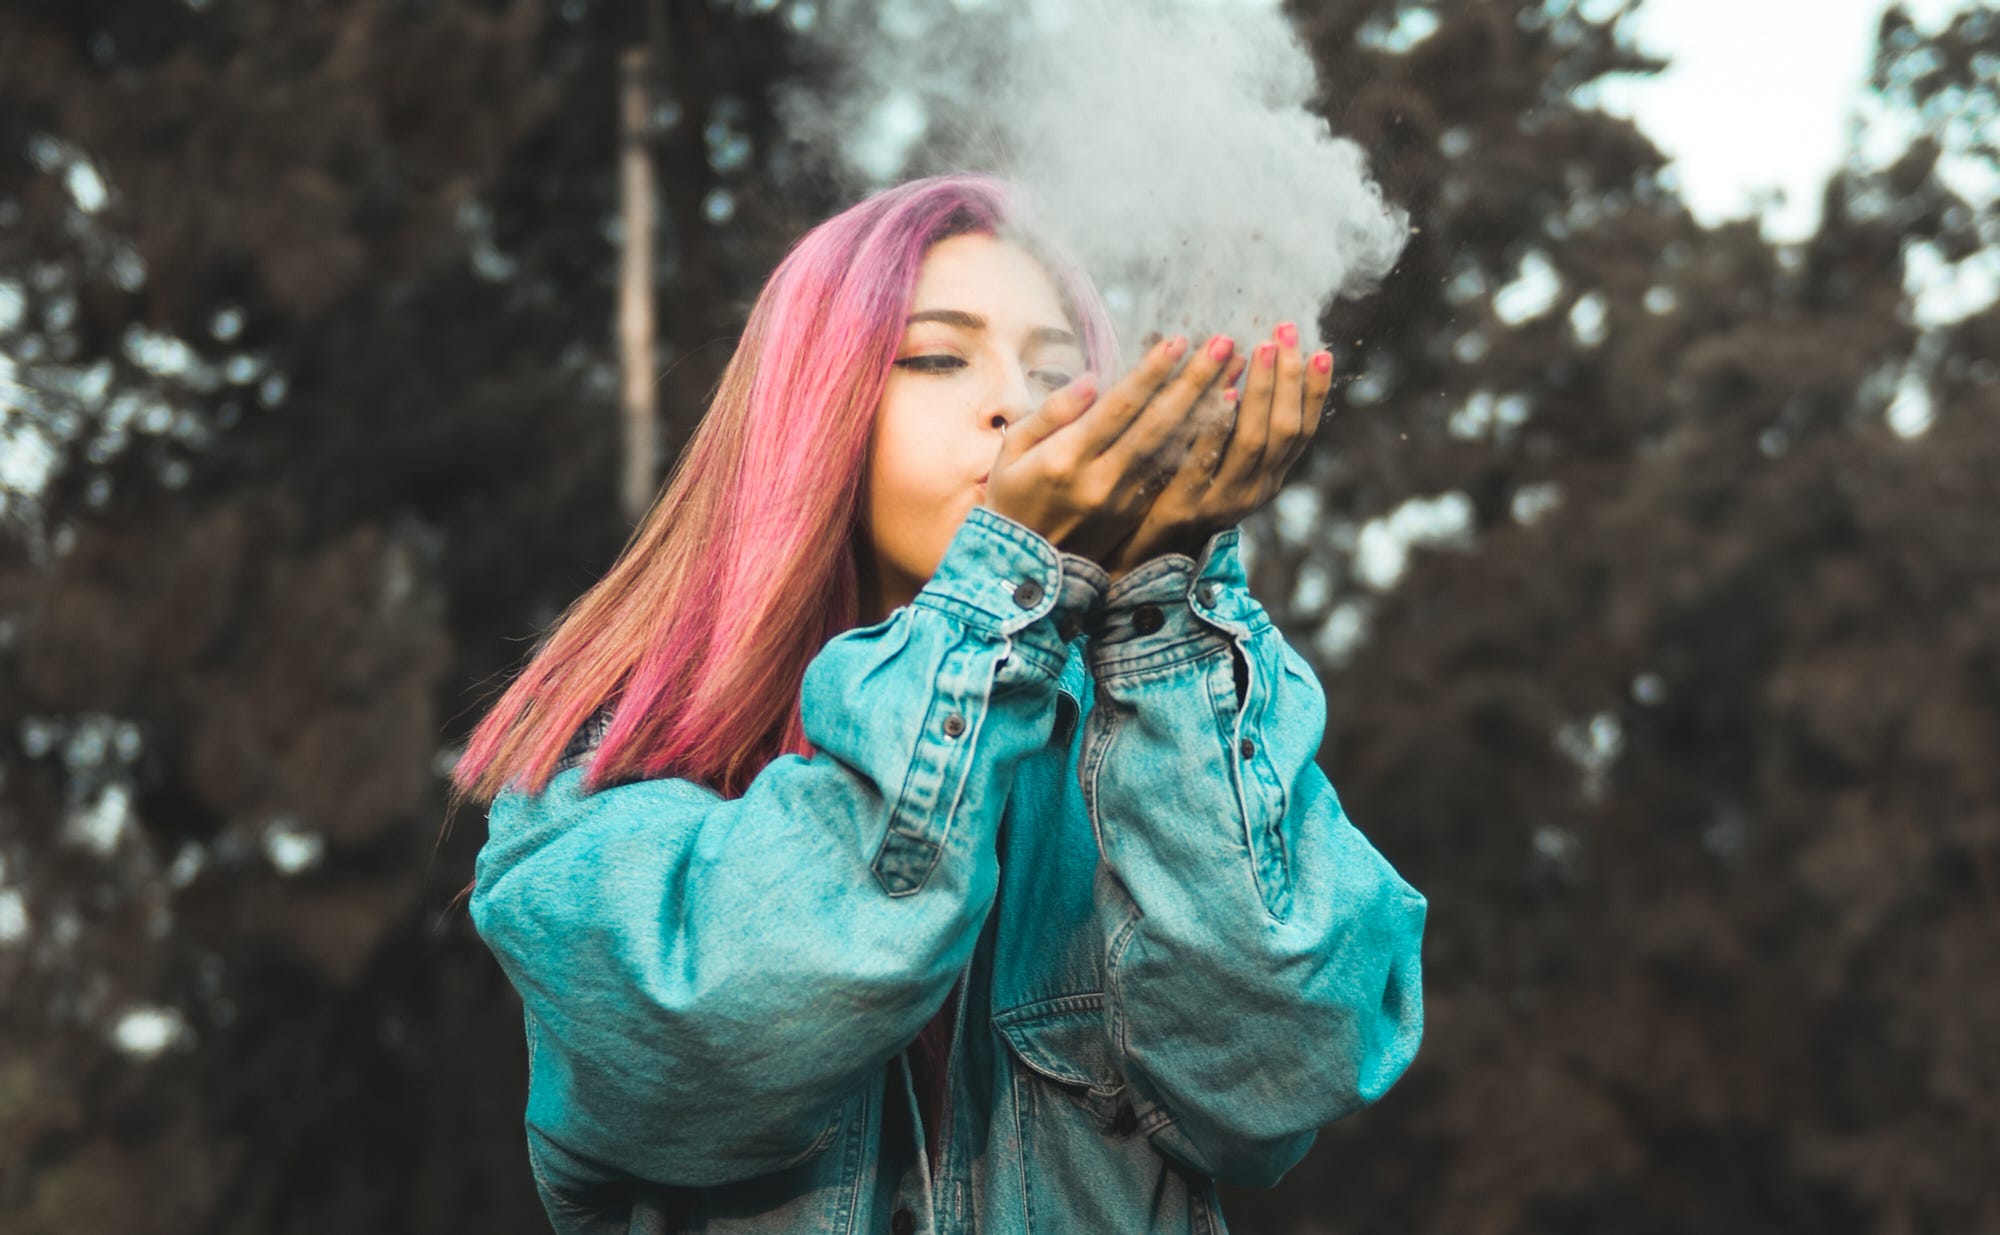 A woman blowing smoke out of her hands